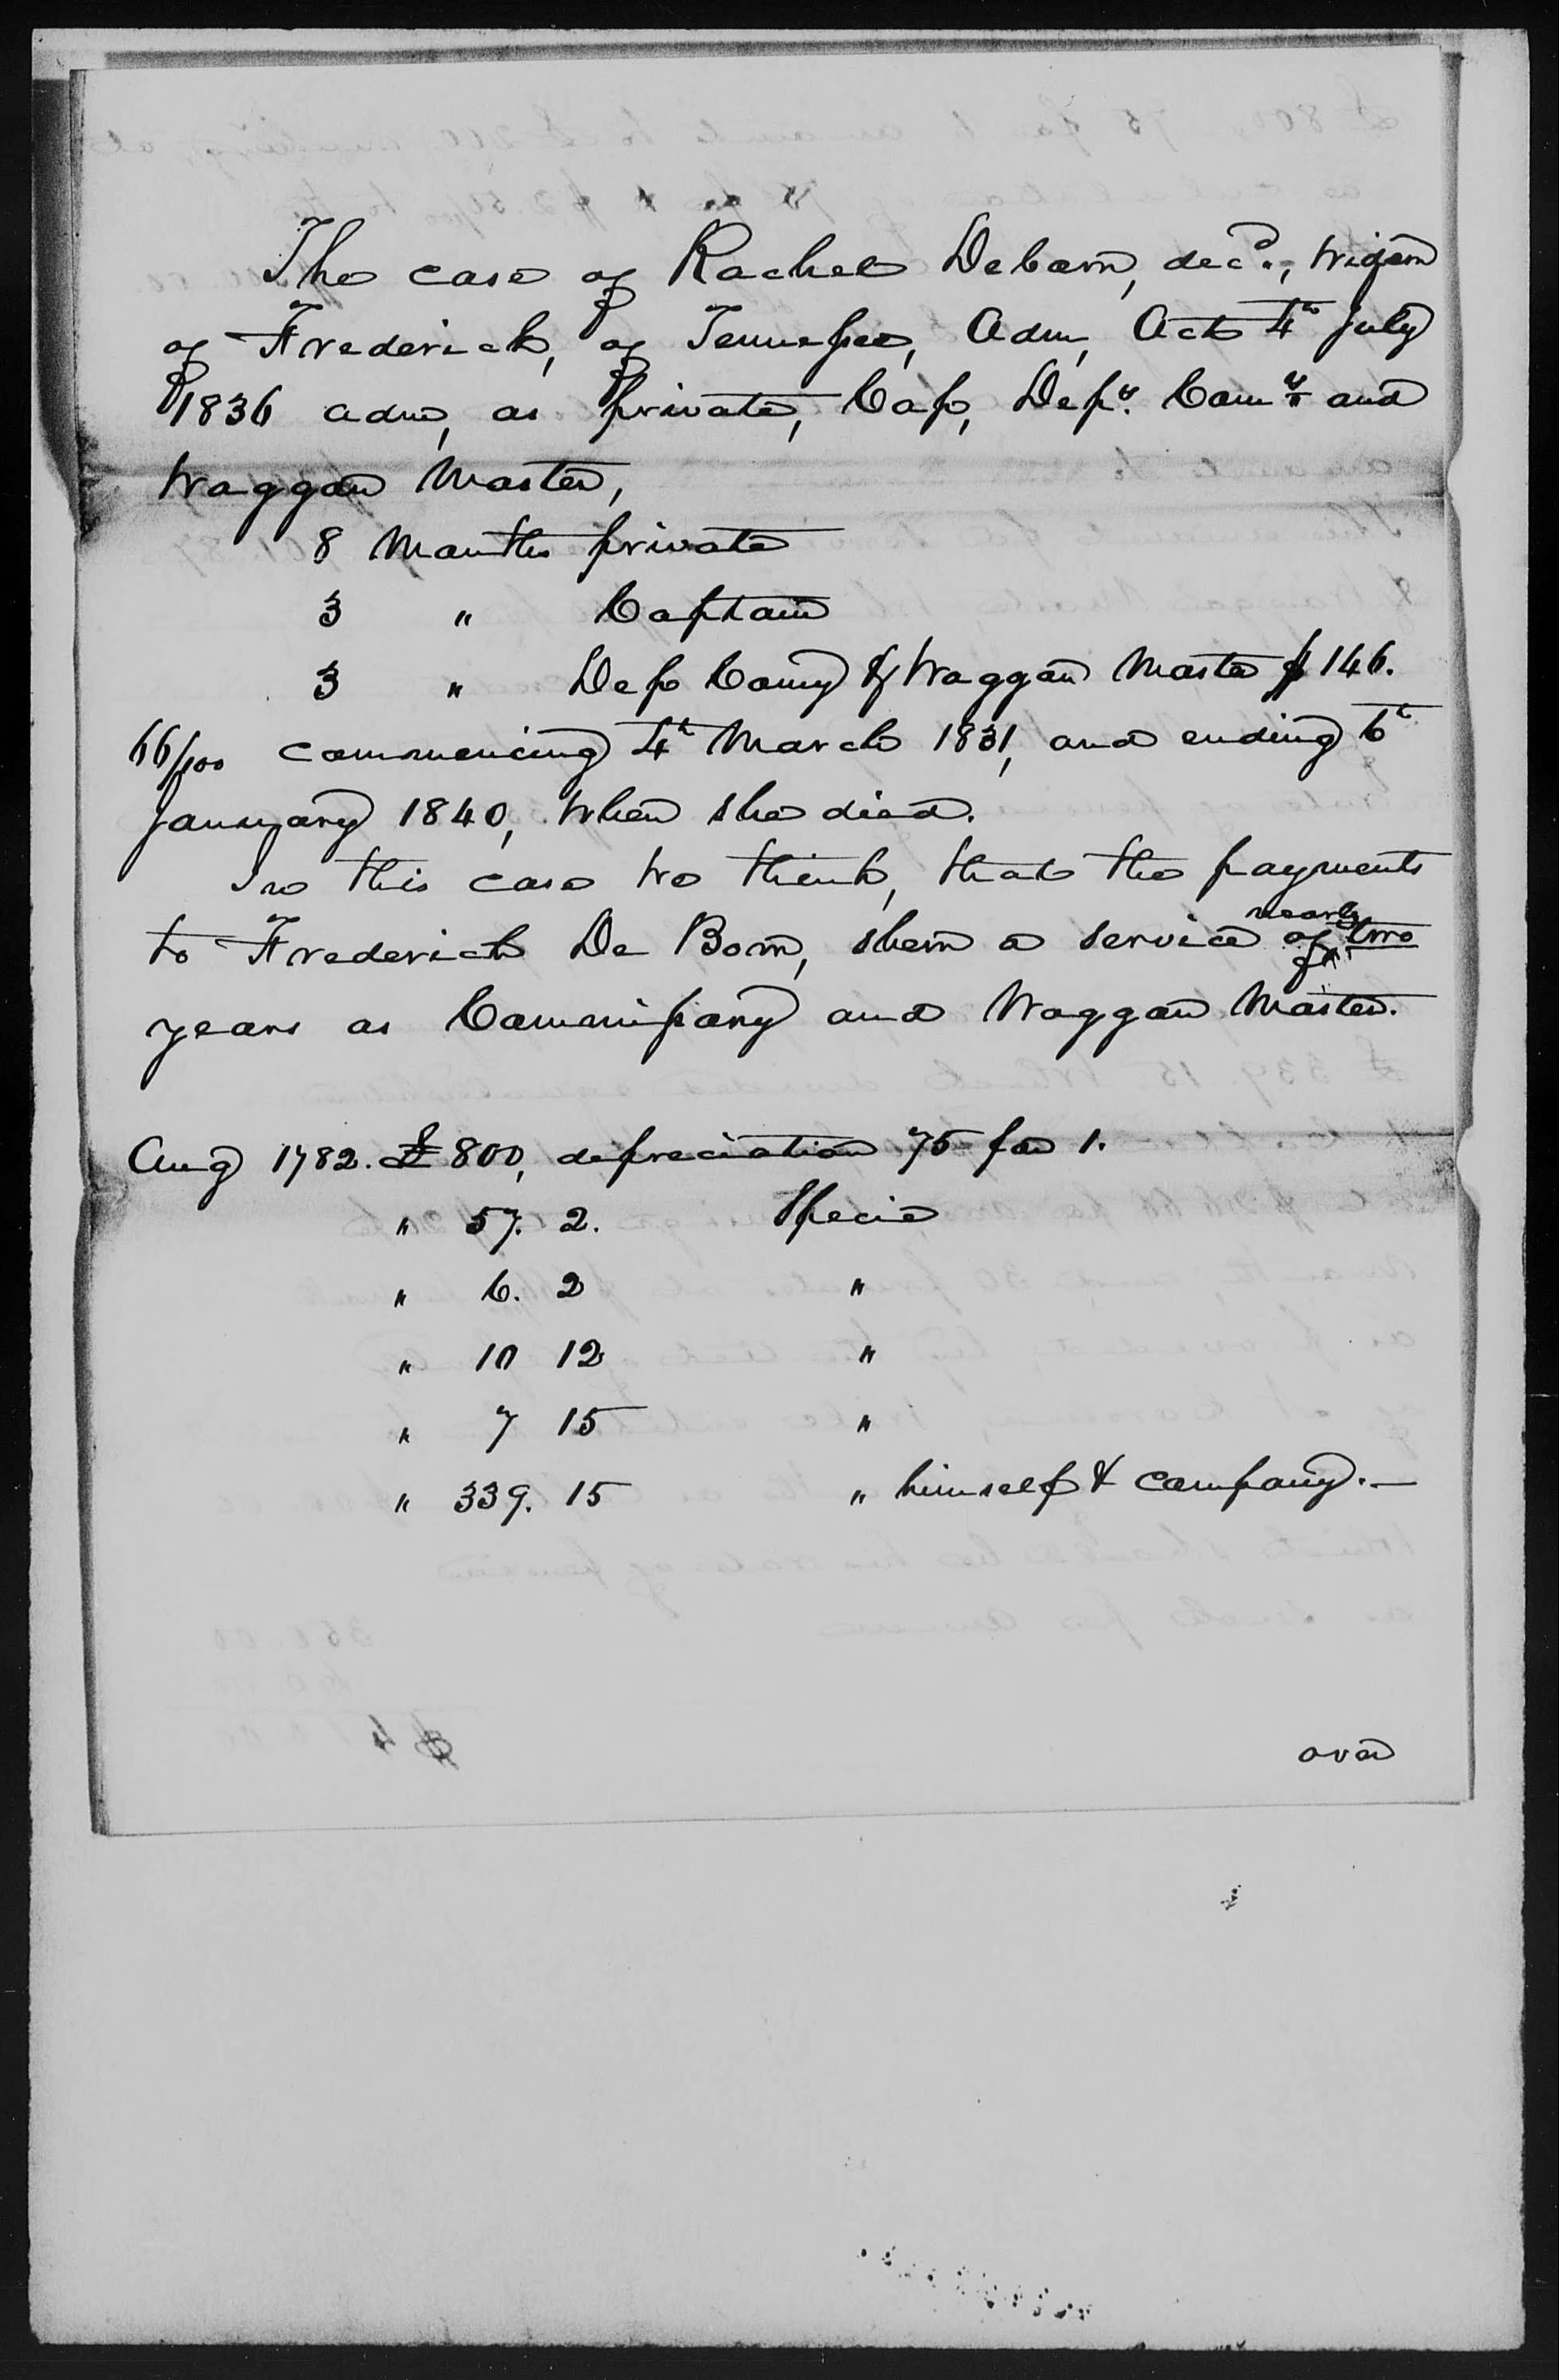 Report of the Pension of Rachel Debow from H. S. Evans to James Ewell Heath, circa 1851, page 1